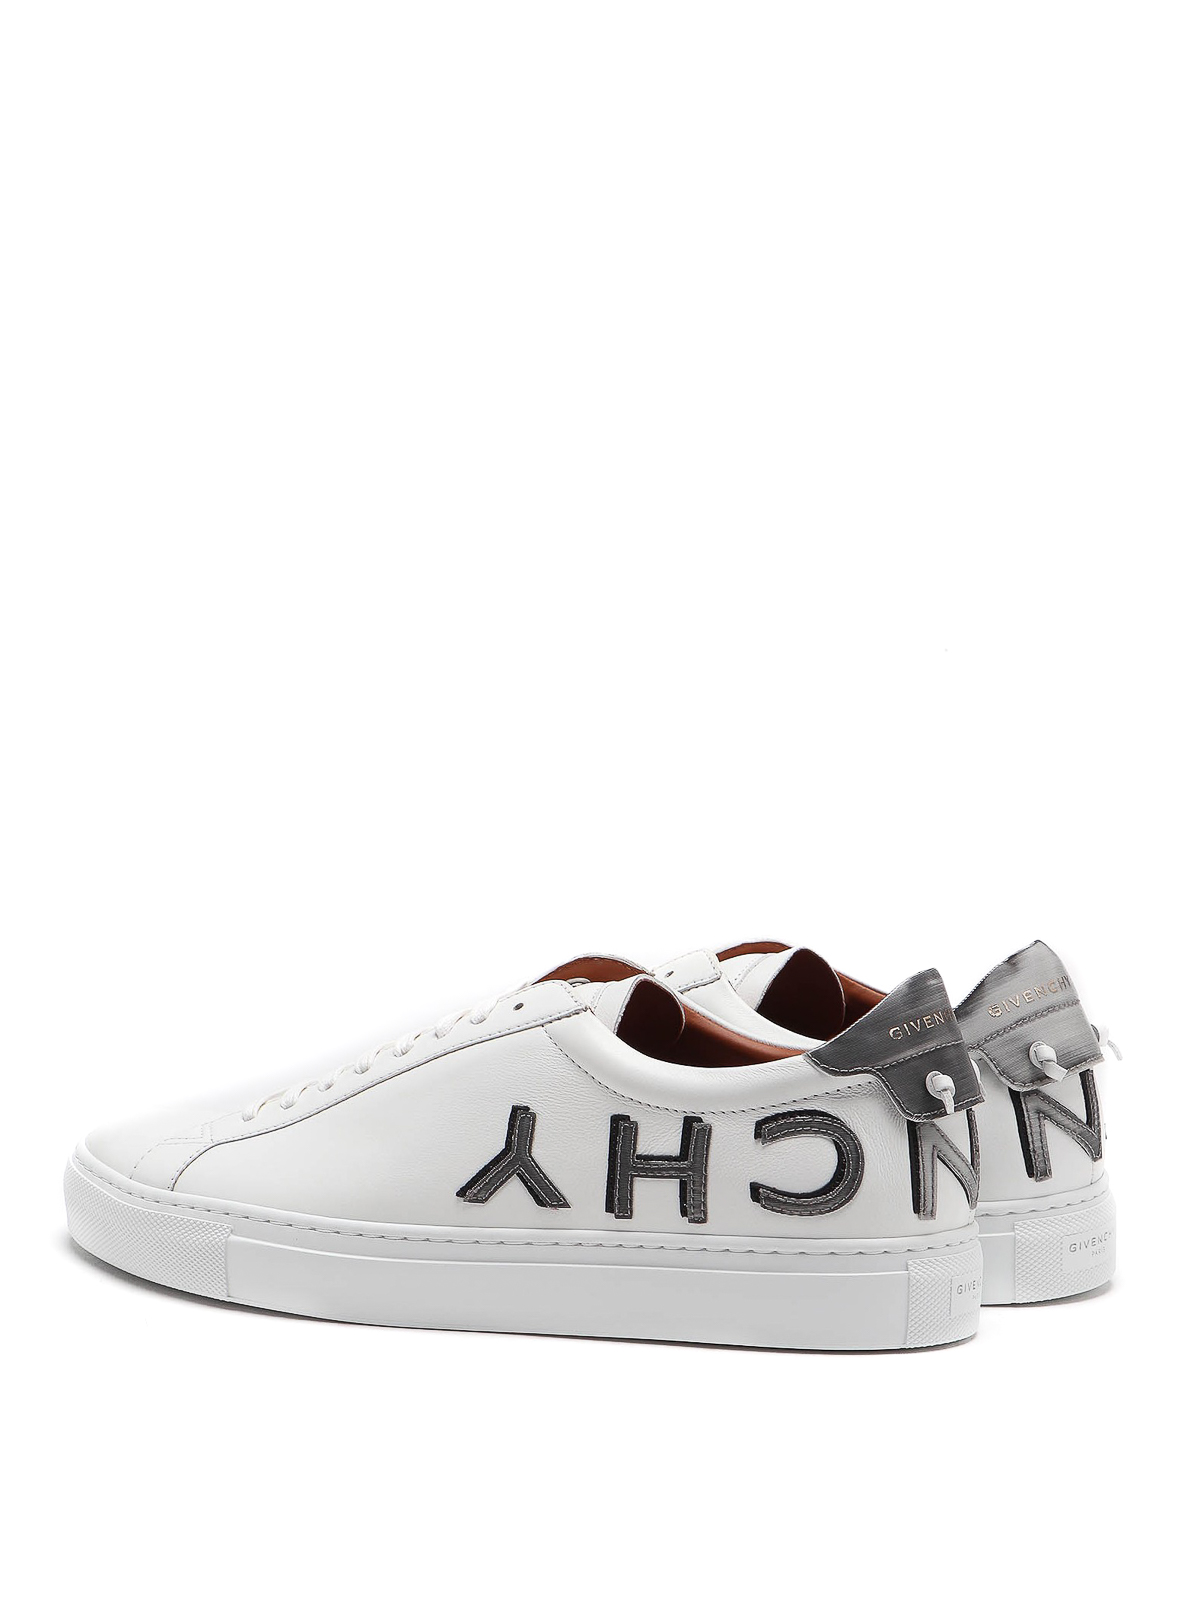 Trainers Givenchy - Urban Street leather sneakers - BH001DH0KZ100